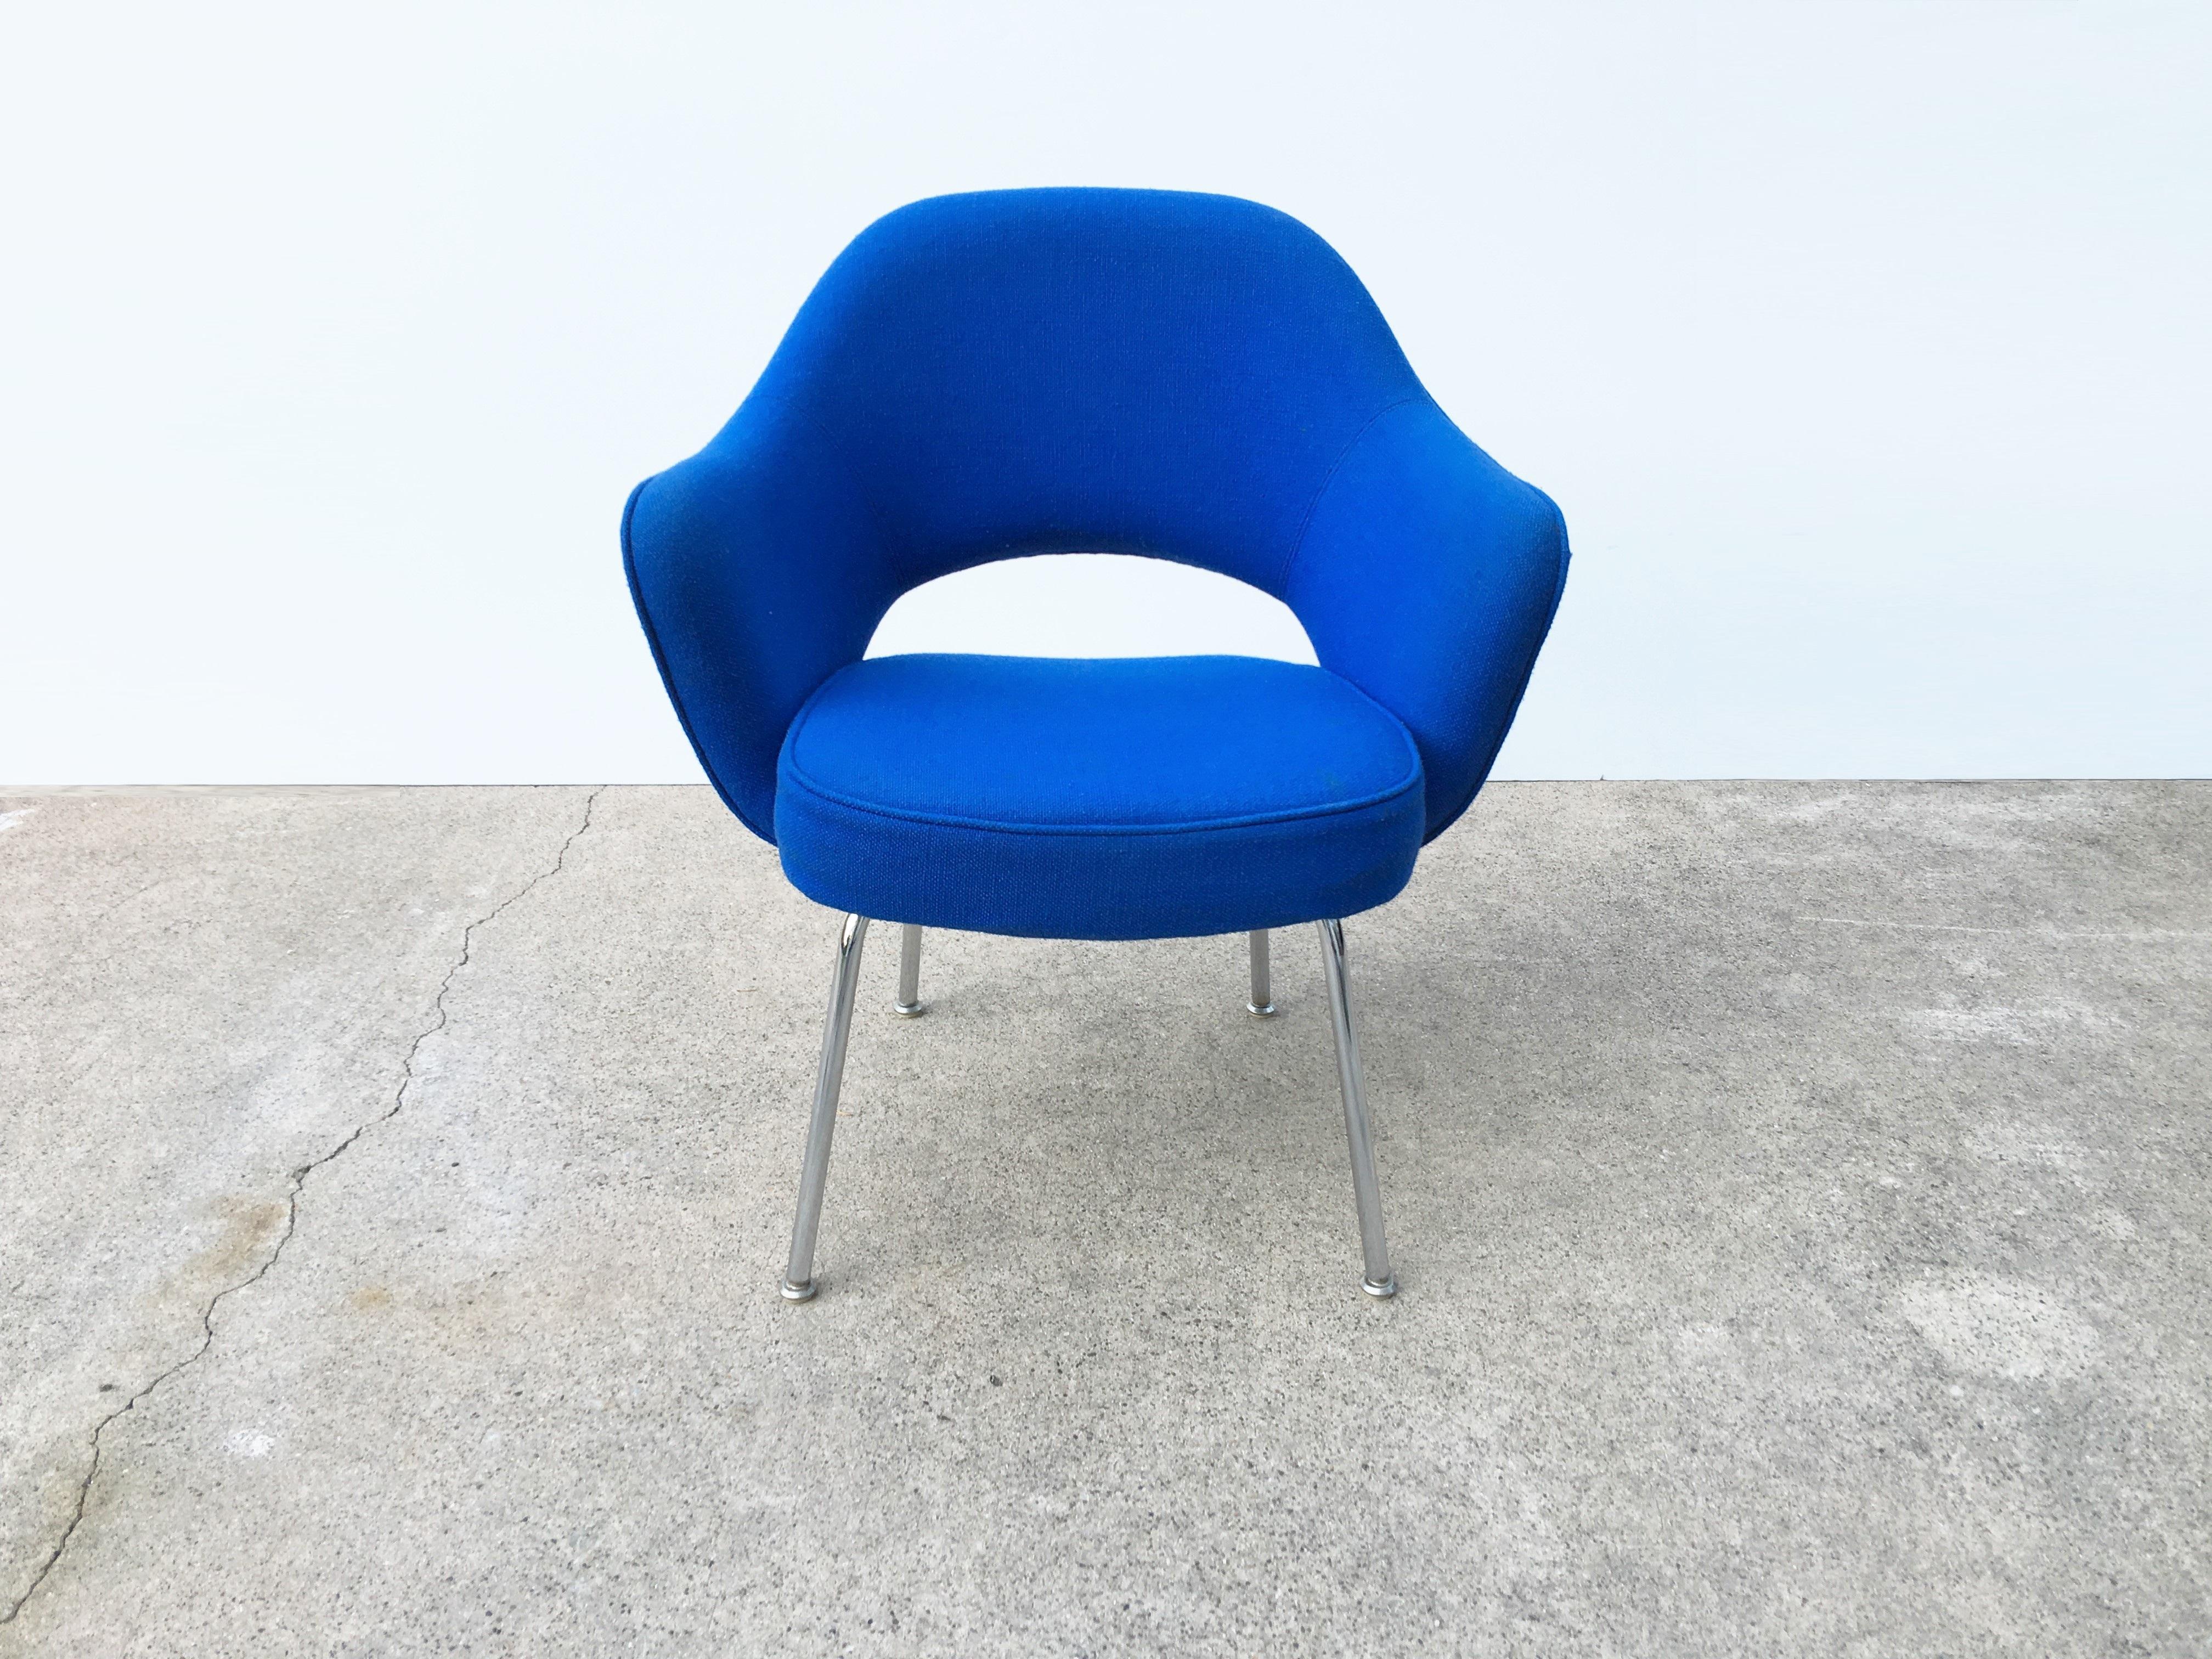 Eight very comfortable Knoll Eero Saarinen Executive dining armchairs retaining its original blue upholstery with minor fading. Can be used as-is, new upholstery is recommended. Knoll label on bottom of seat. 

Featured in nearly all Florence